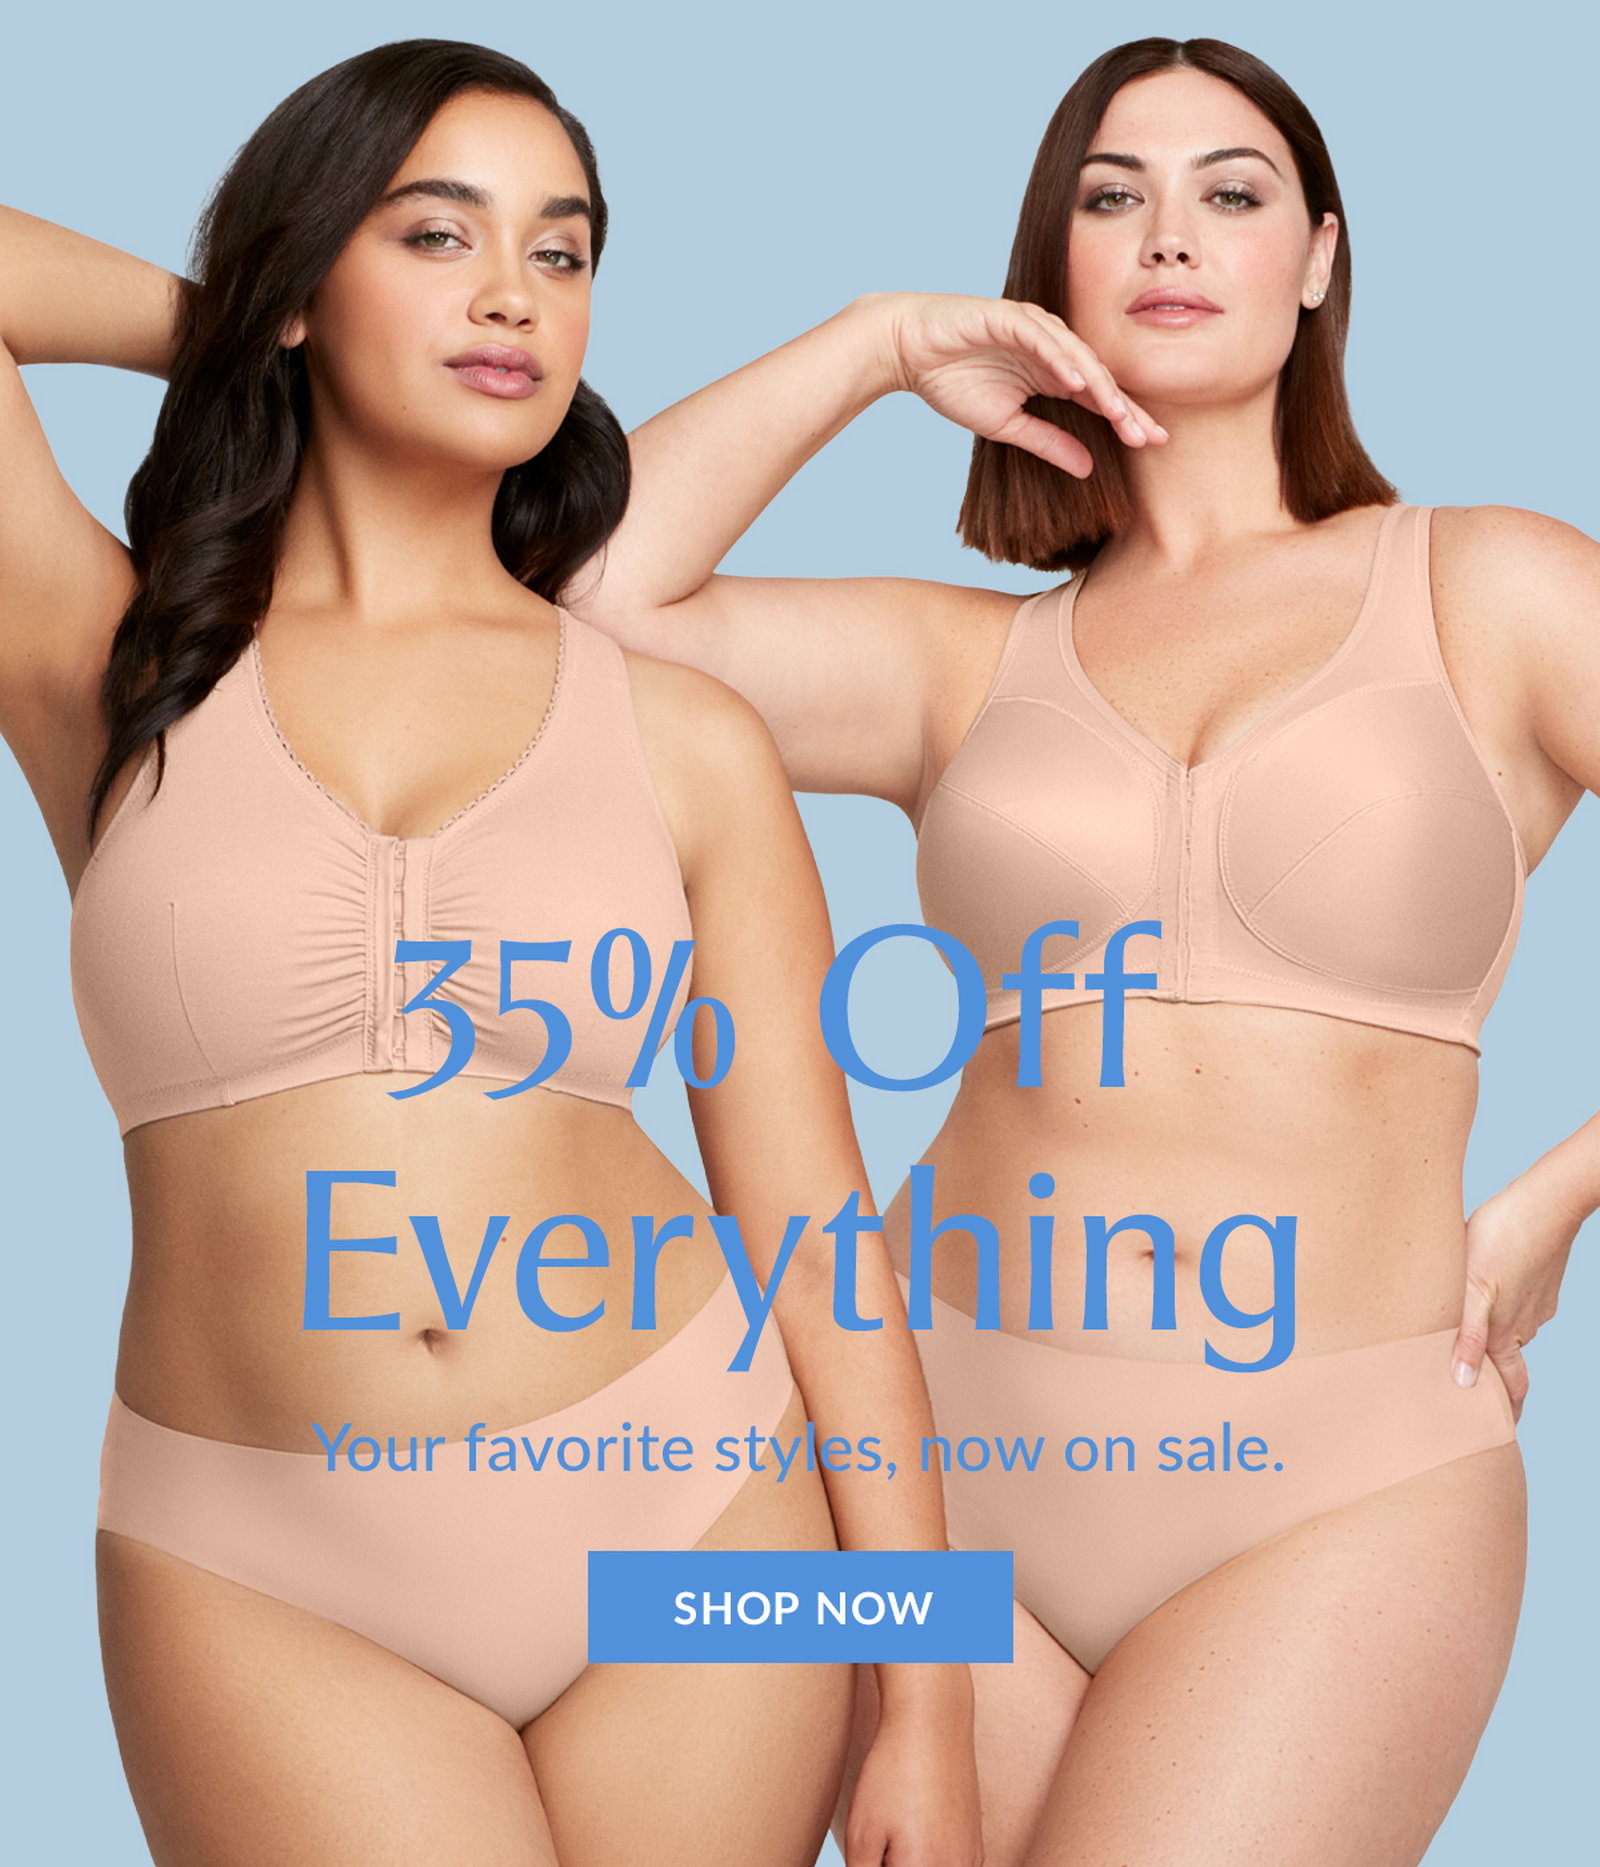 glamorise: All bras are 35% off